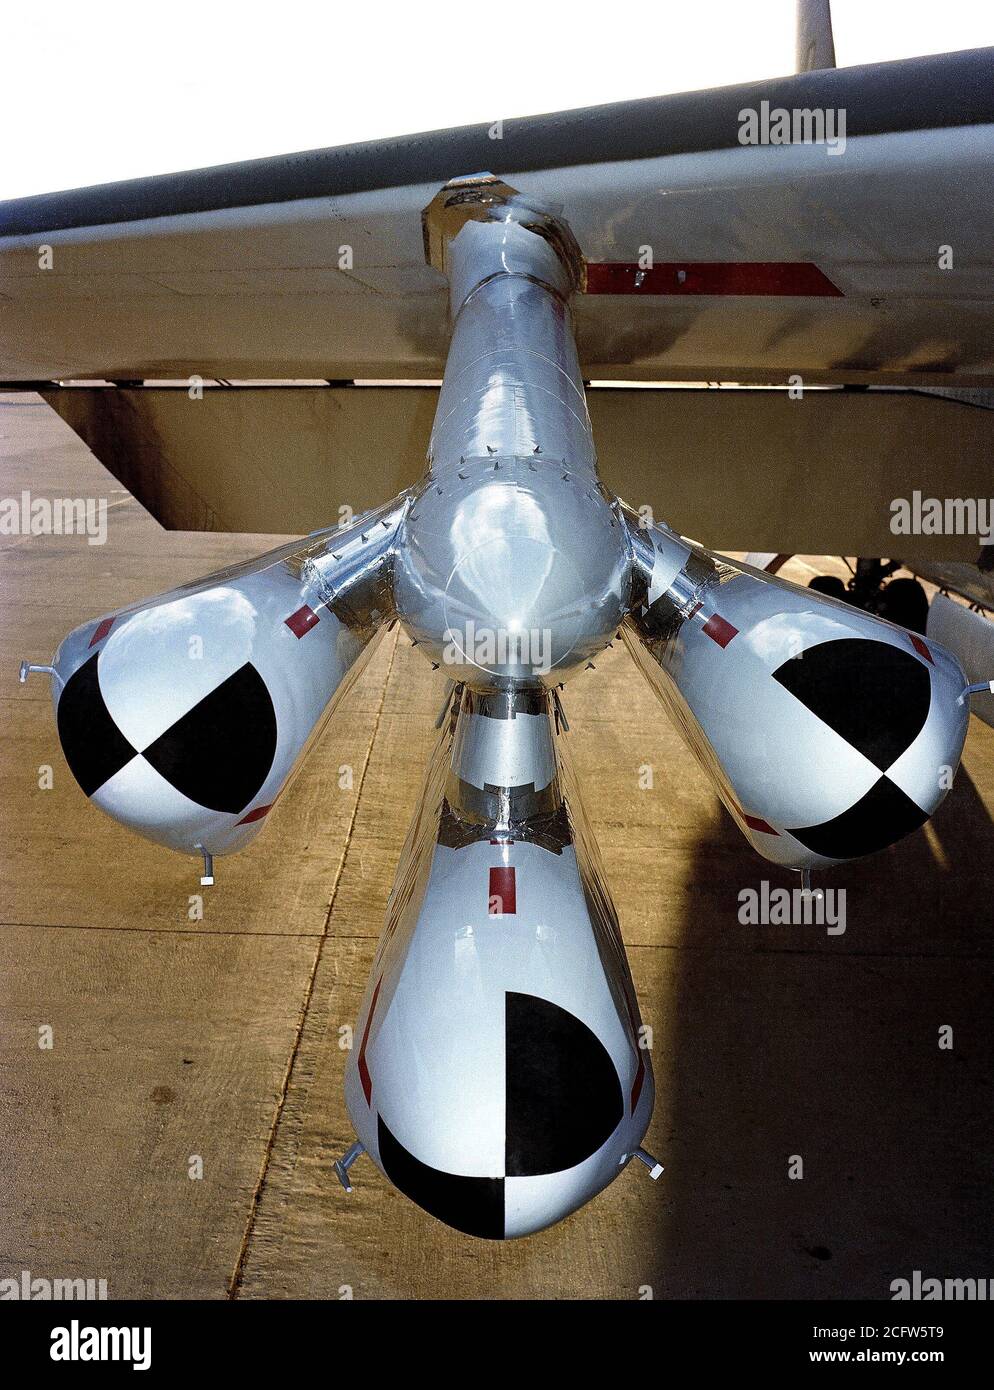 1979 - A close-up view of a AGM-109 Tomahawk air-launched cruise missile loaded on a B-52 Stratofortress aircraft. Stock Photo